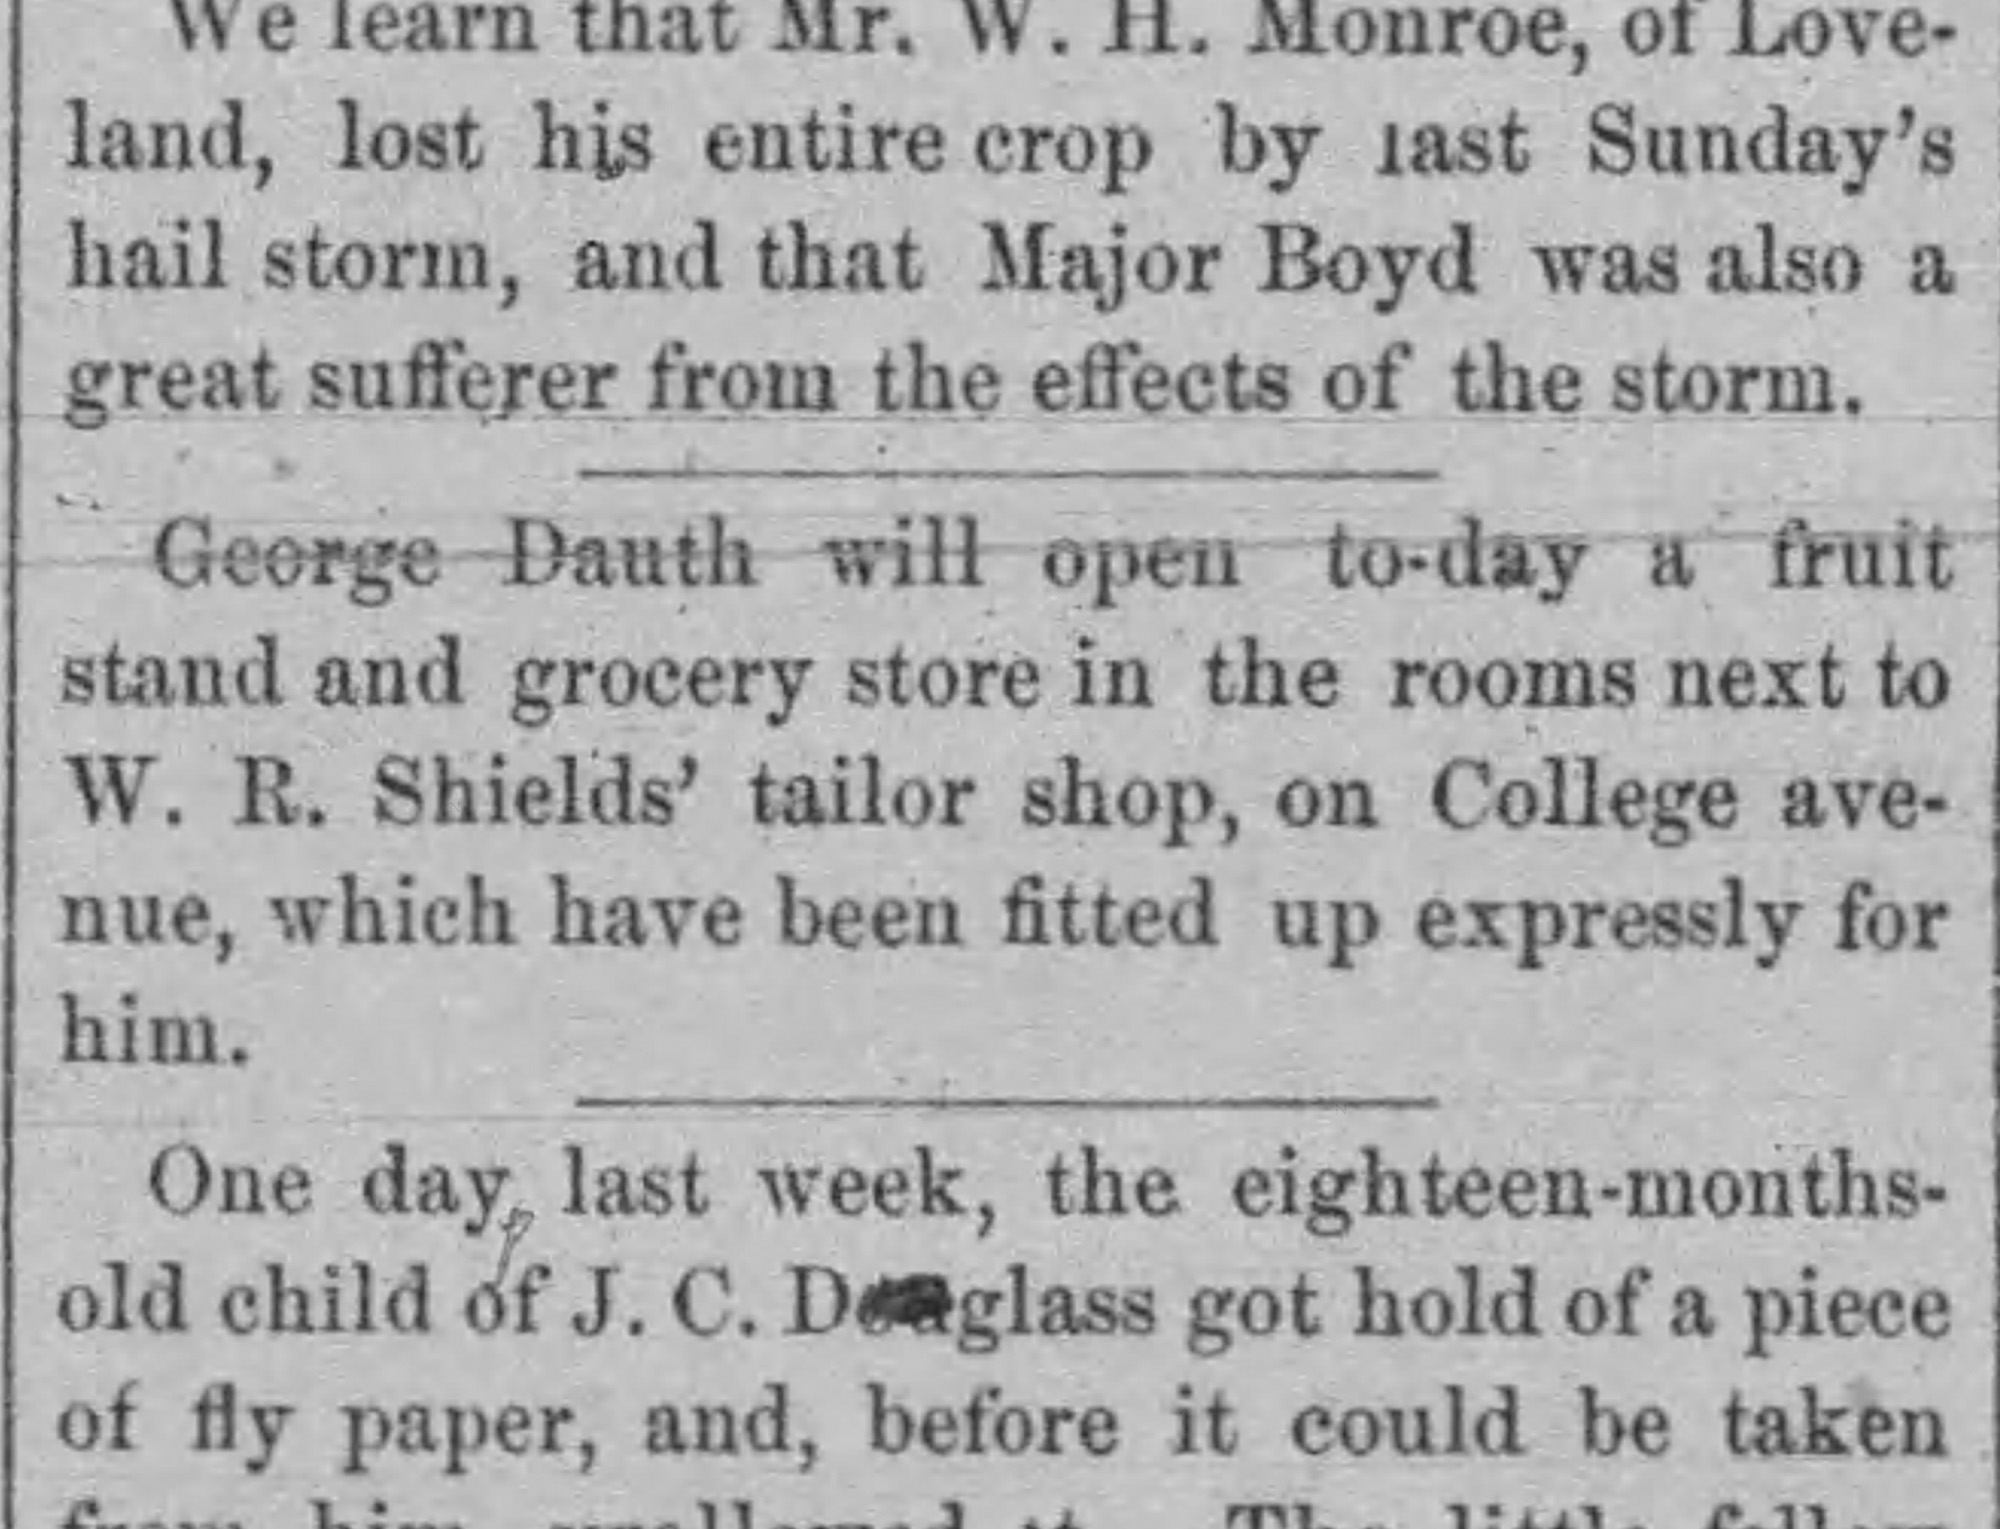 Dauth Family Archive - 1885-07-30 - The Fort Collins Courier - George Dauth Opens Grocery